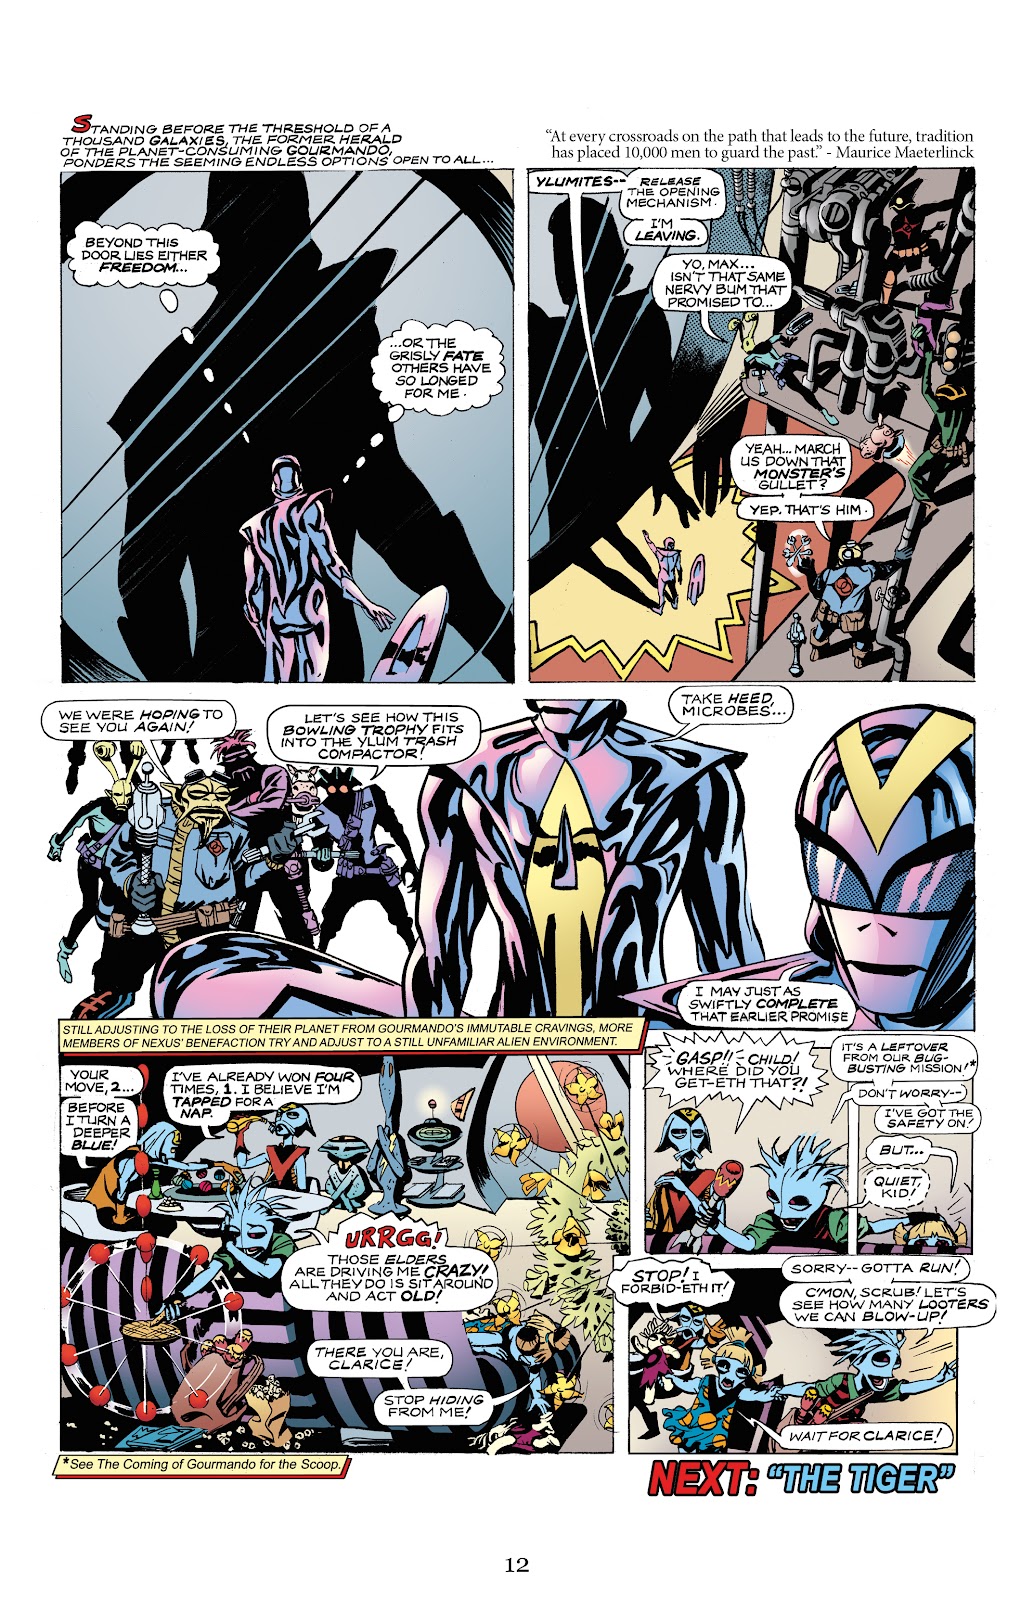 Nexus Newspaper Strips Vol 2: The Battle For Thuneworld issue 1 - Page 14